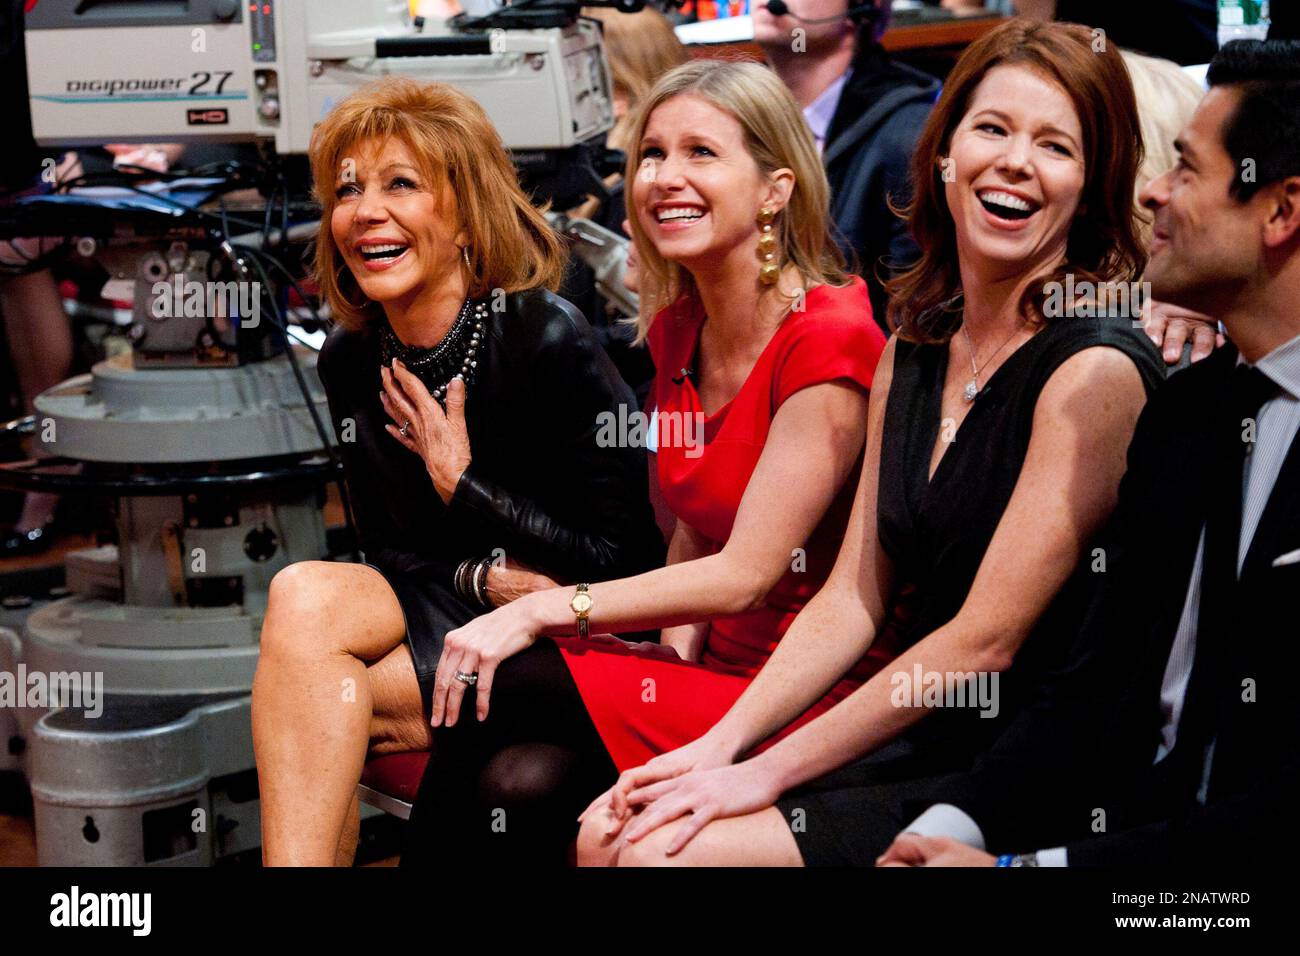 Regis wife, Joy Philbin, left, and his daughters, sit in the audience during Regis farewell episode of